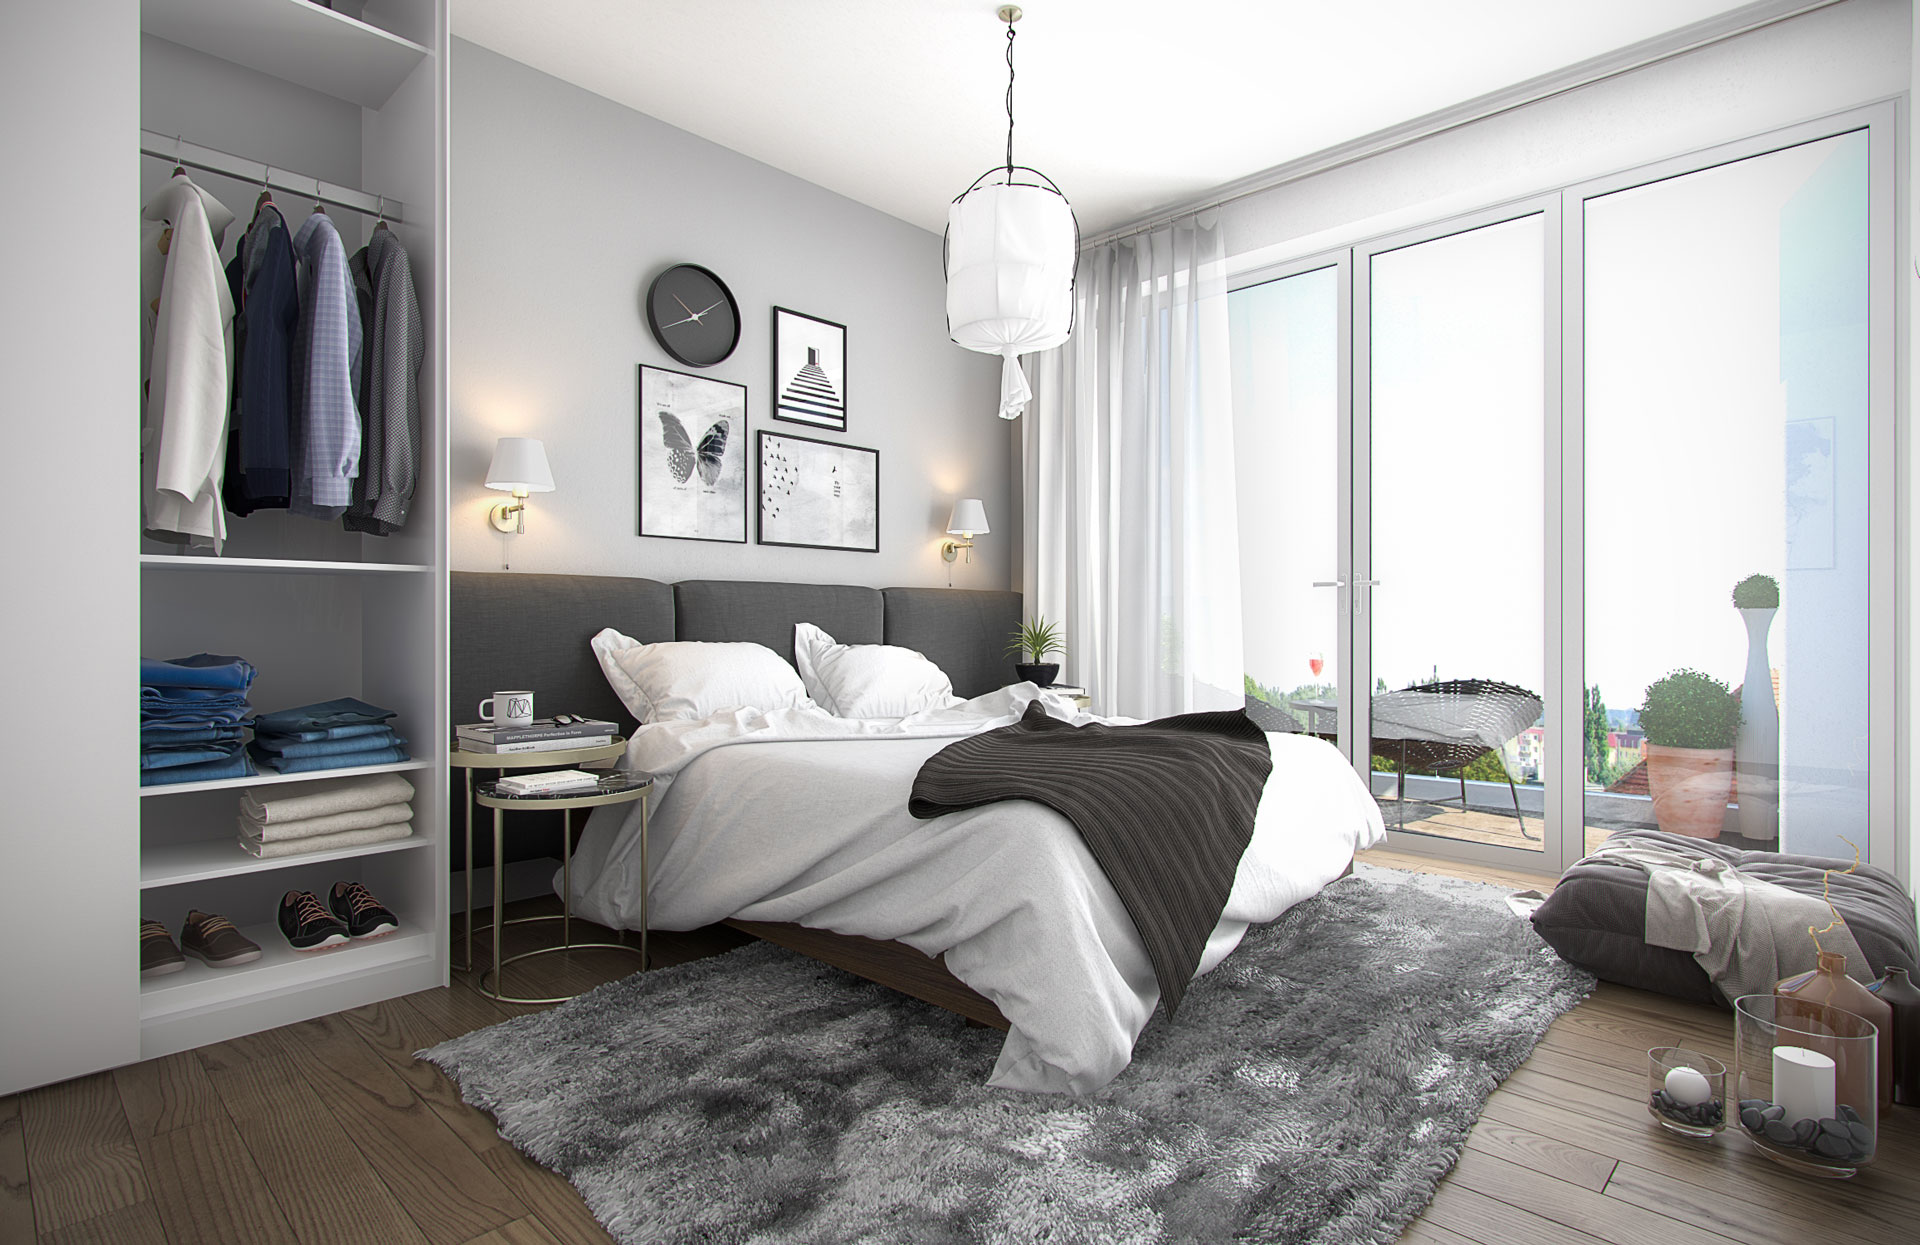 Apartment Bedroom Decorating Tips